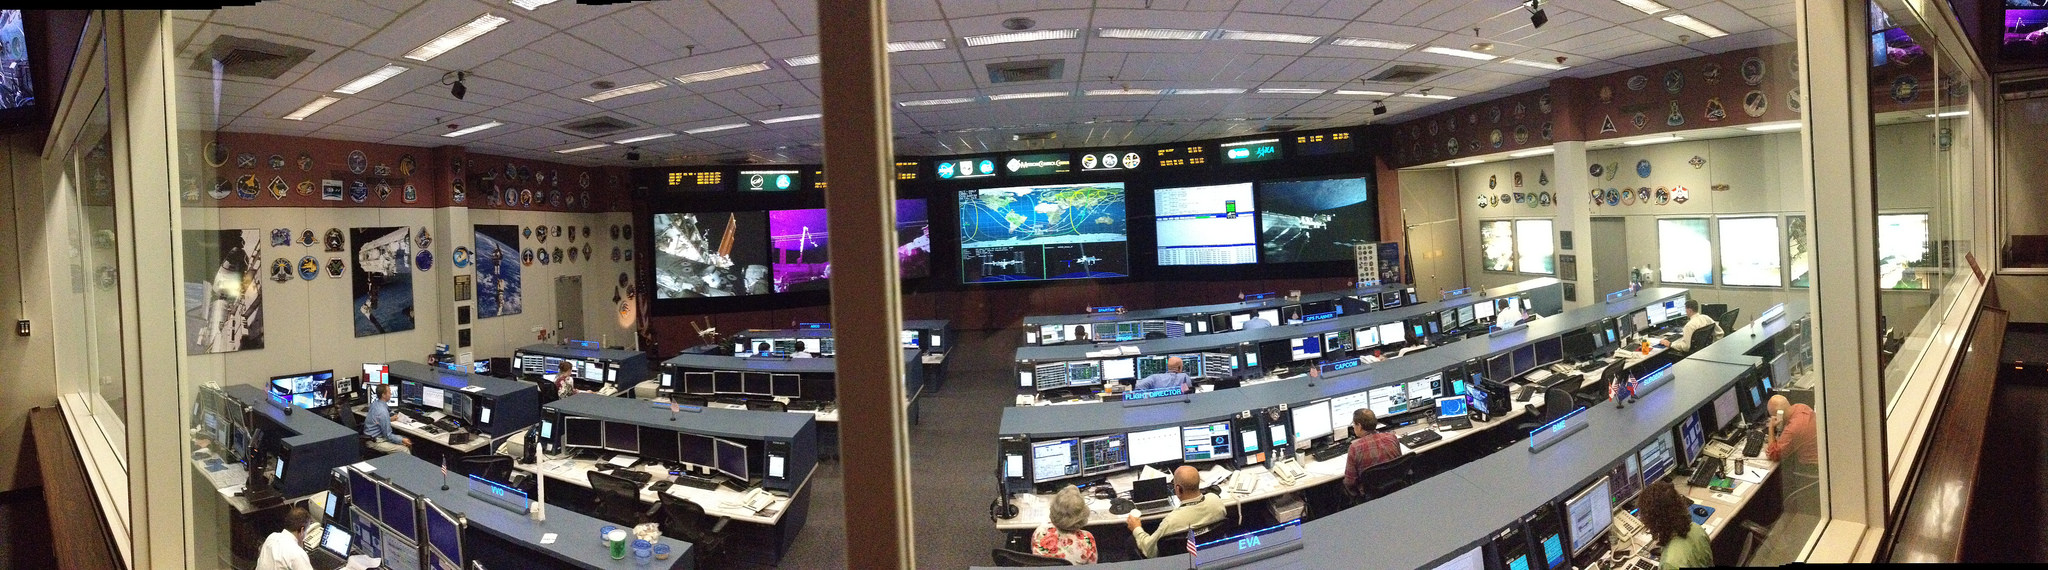 ISS control Room by Paul Wilson